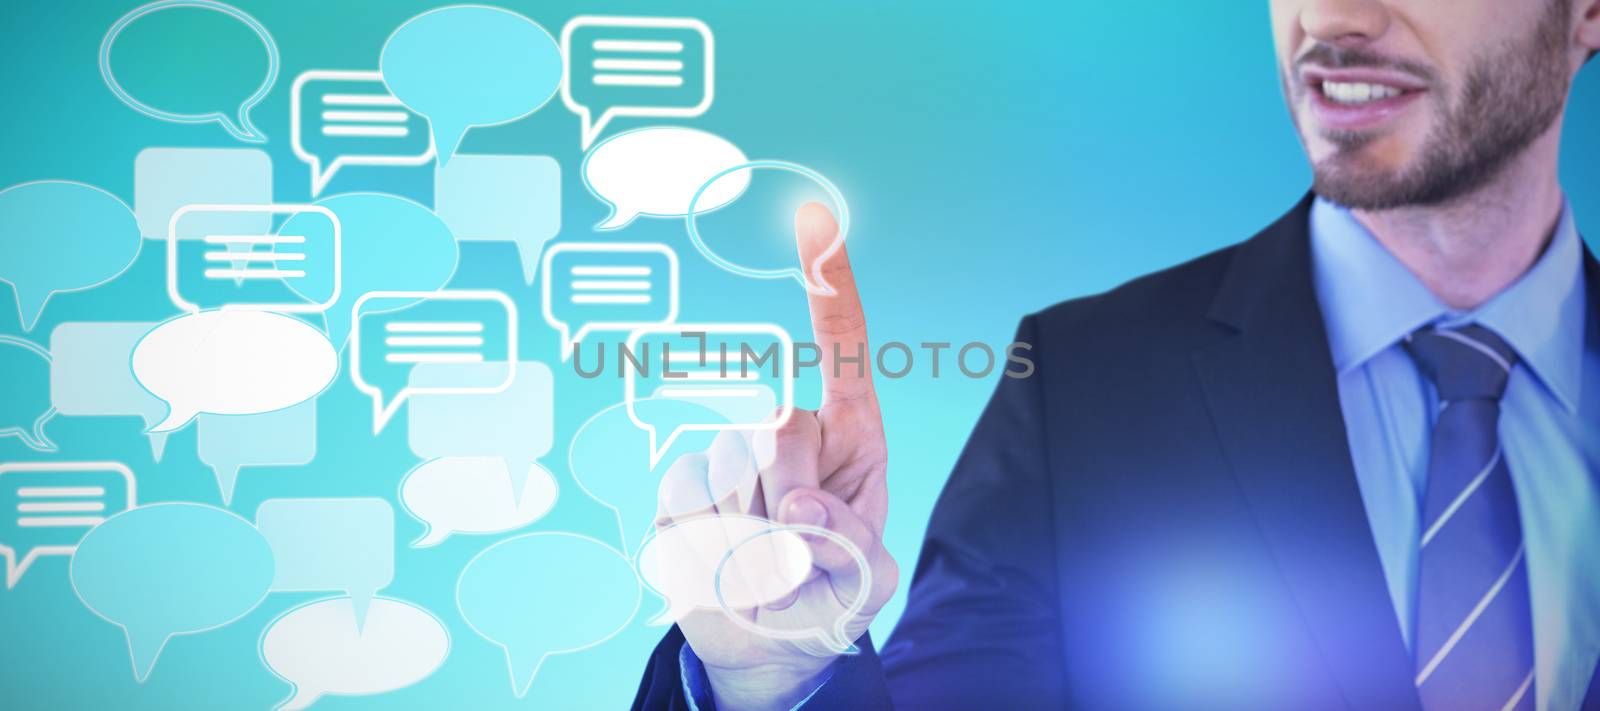 Mid section of smiling businessman touching invisible screen against abstract blue background